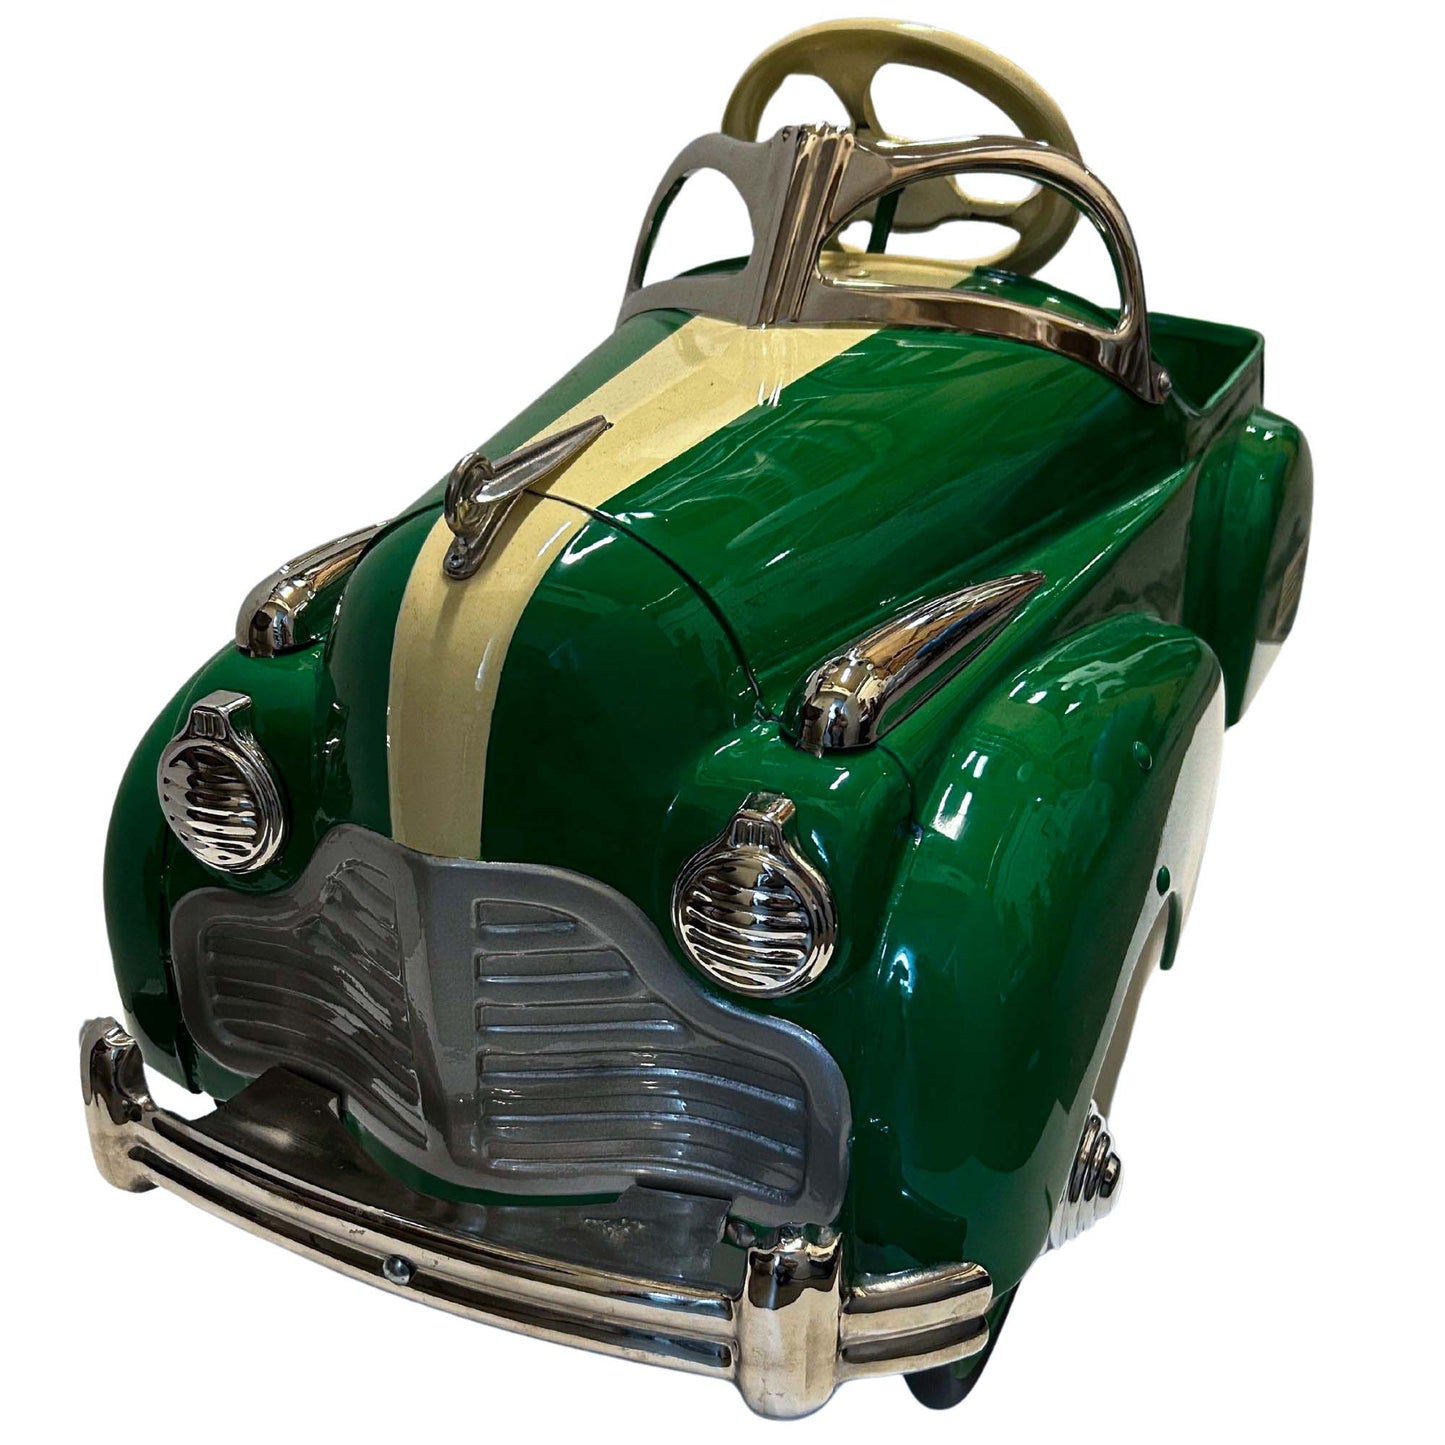 1941 Steelcraft Buick Pedal Car Front View